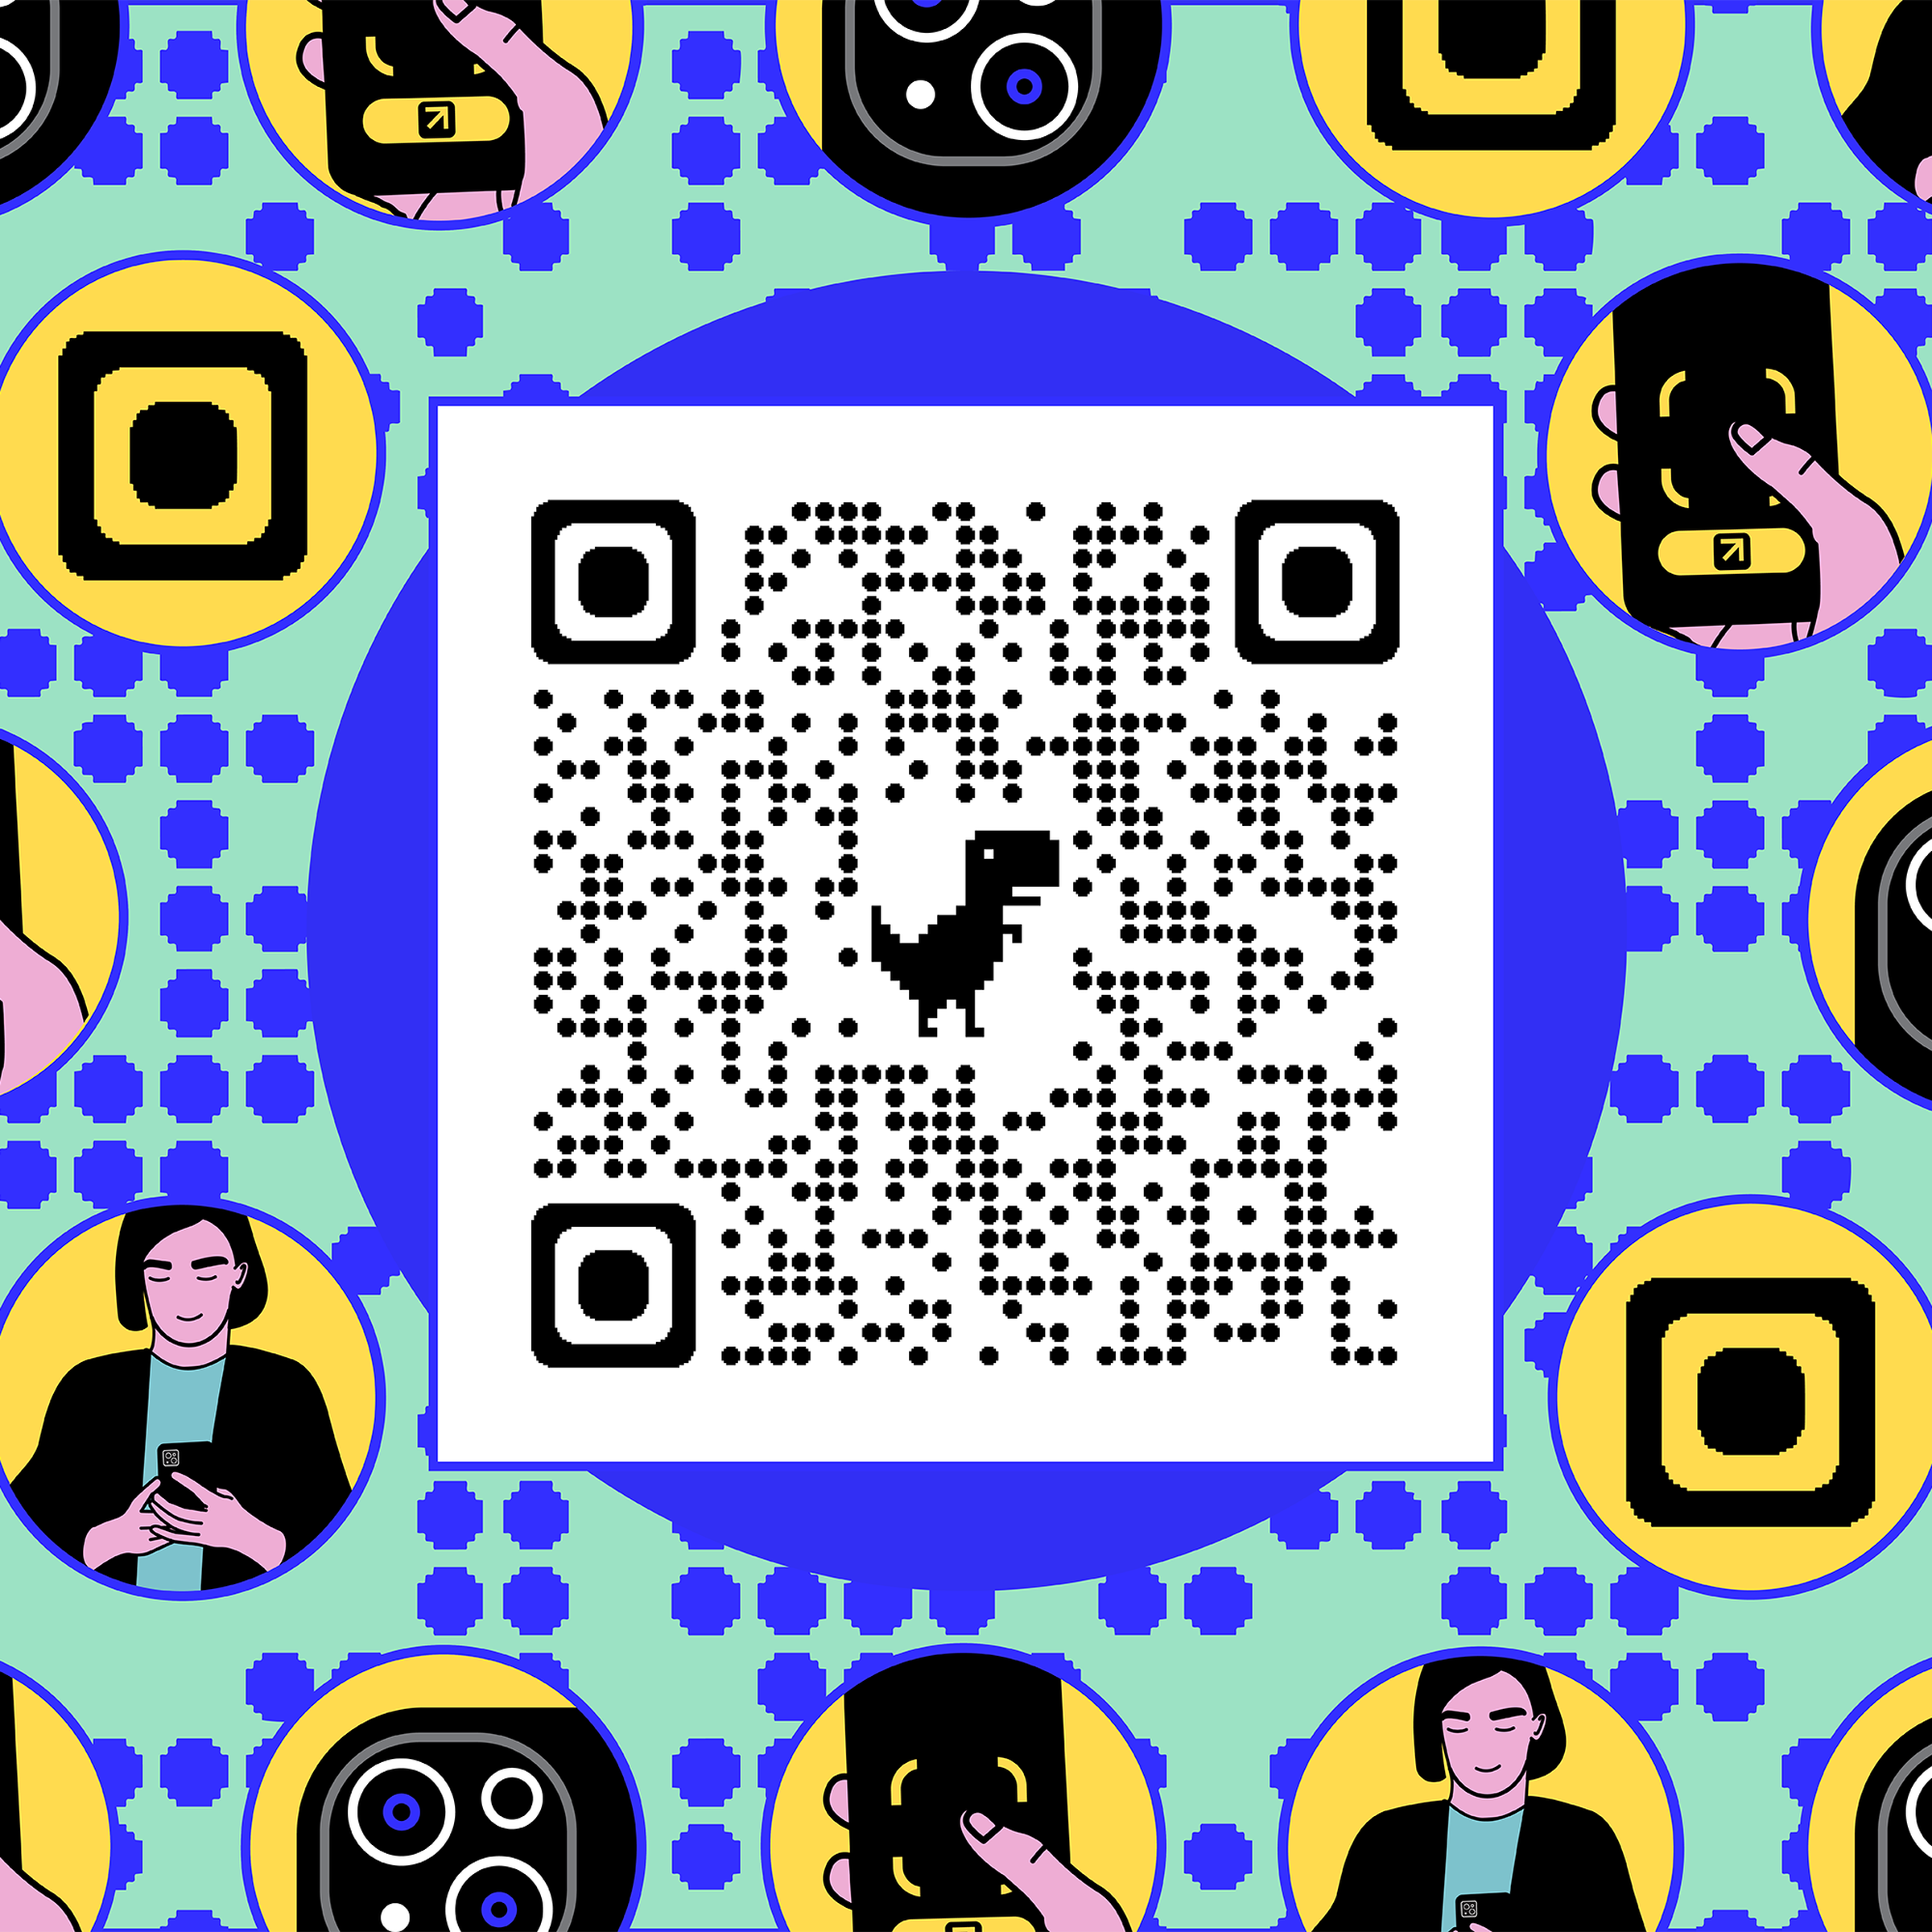 QR code against illustrated background